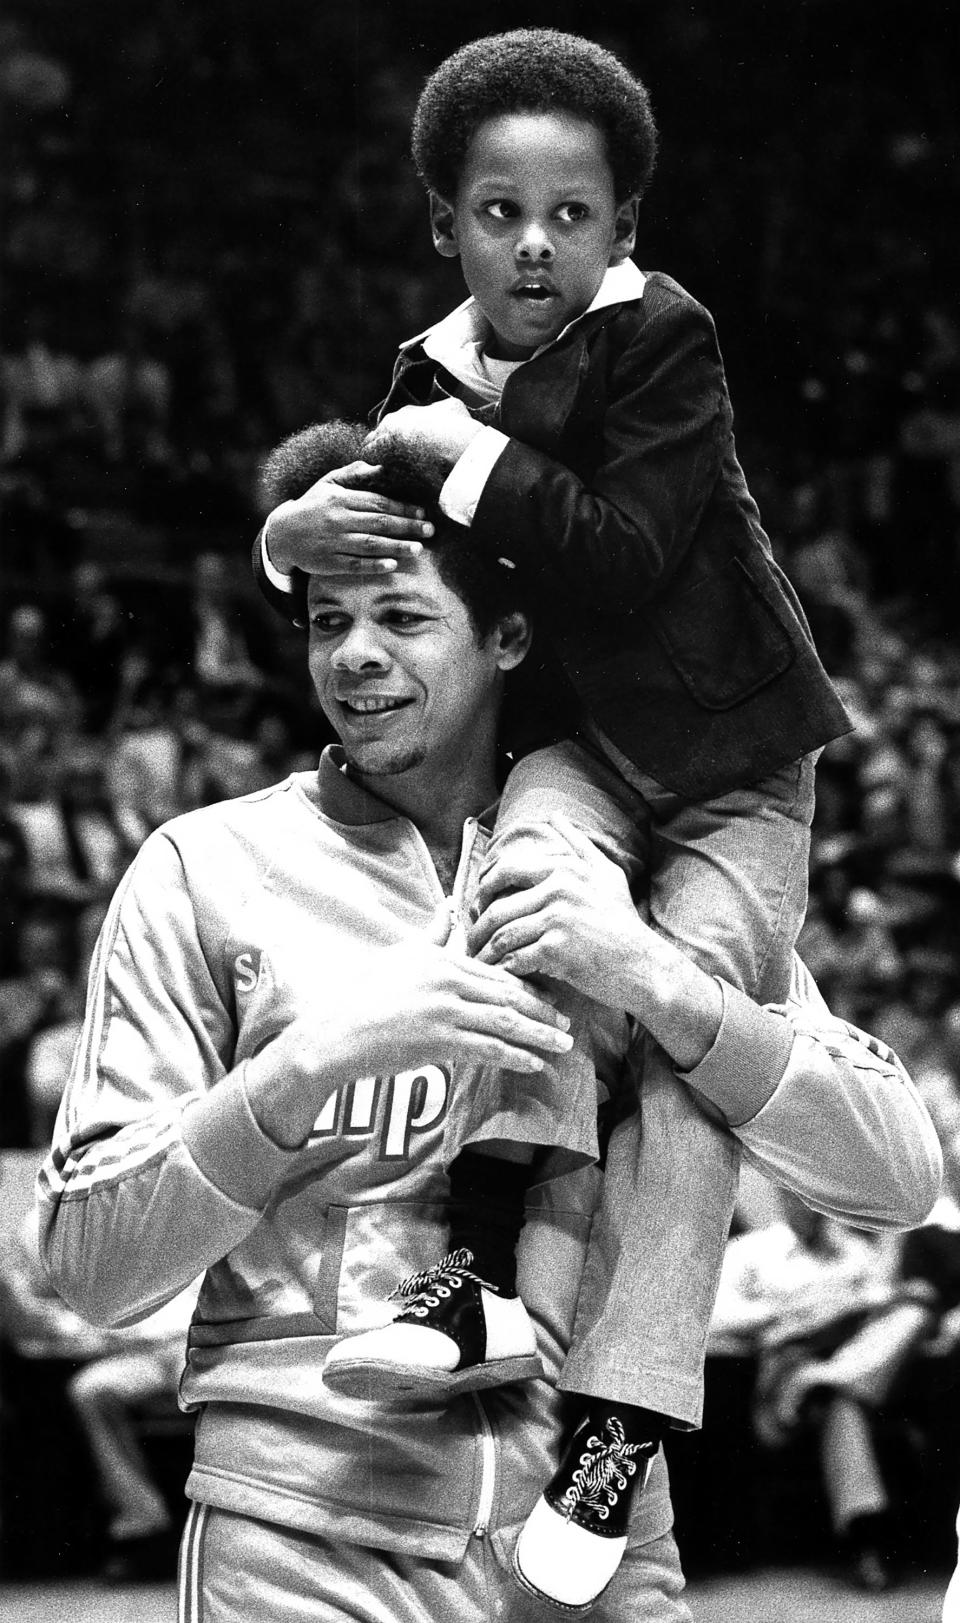 The late Bingo Smith carries his son Andre before a basketball game against the Cleveland Cavaliers on Dec. 4, 1979.